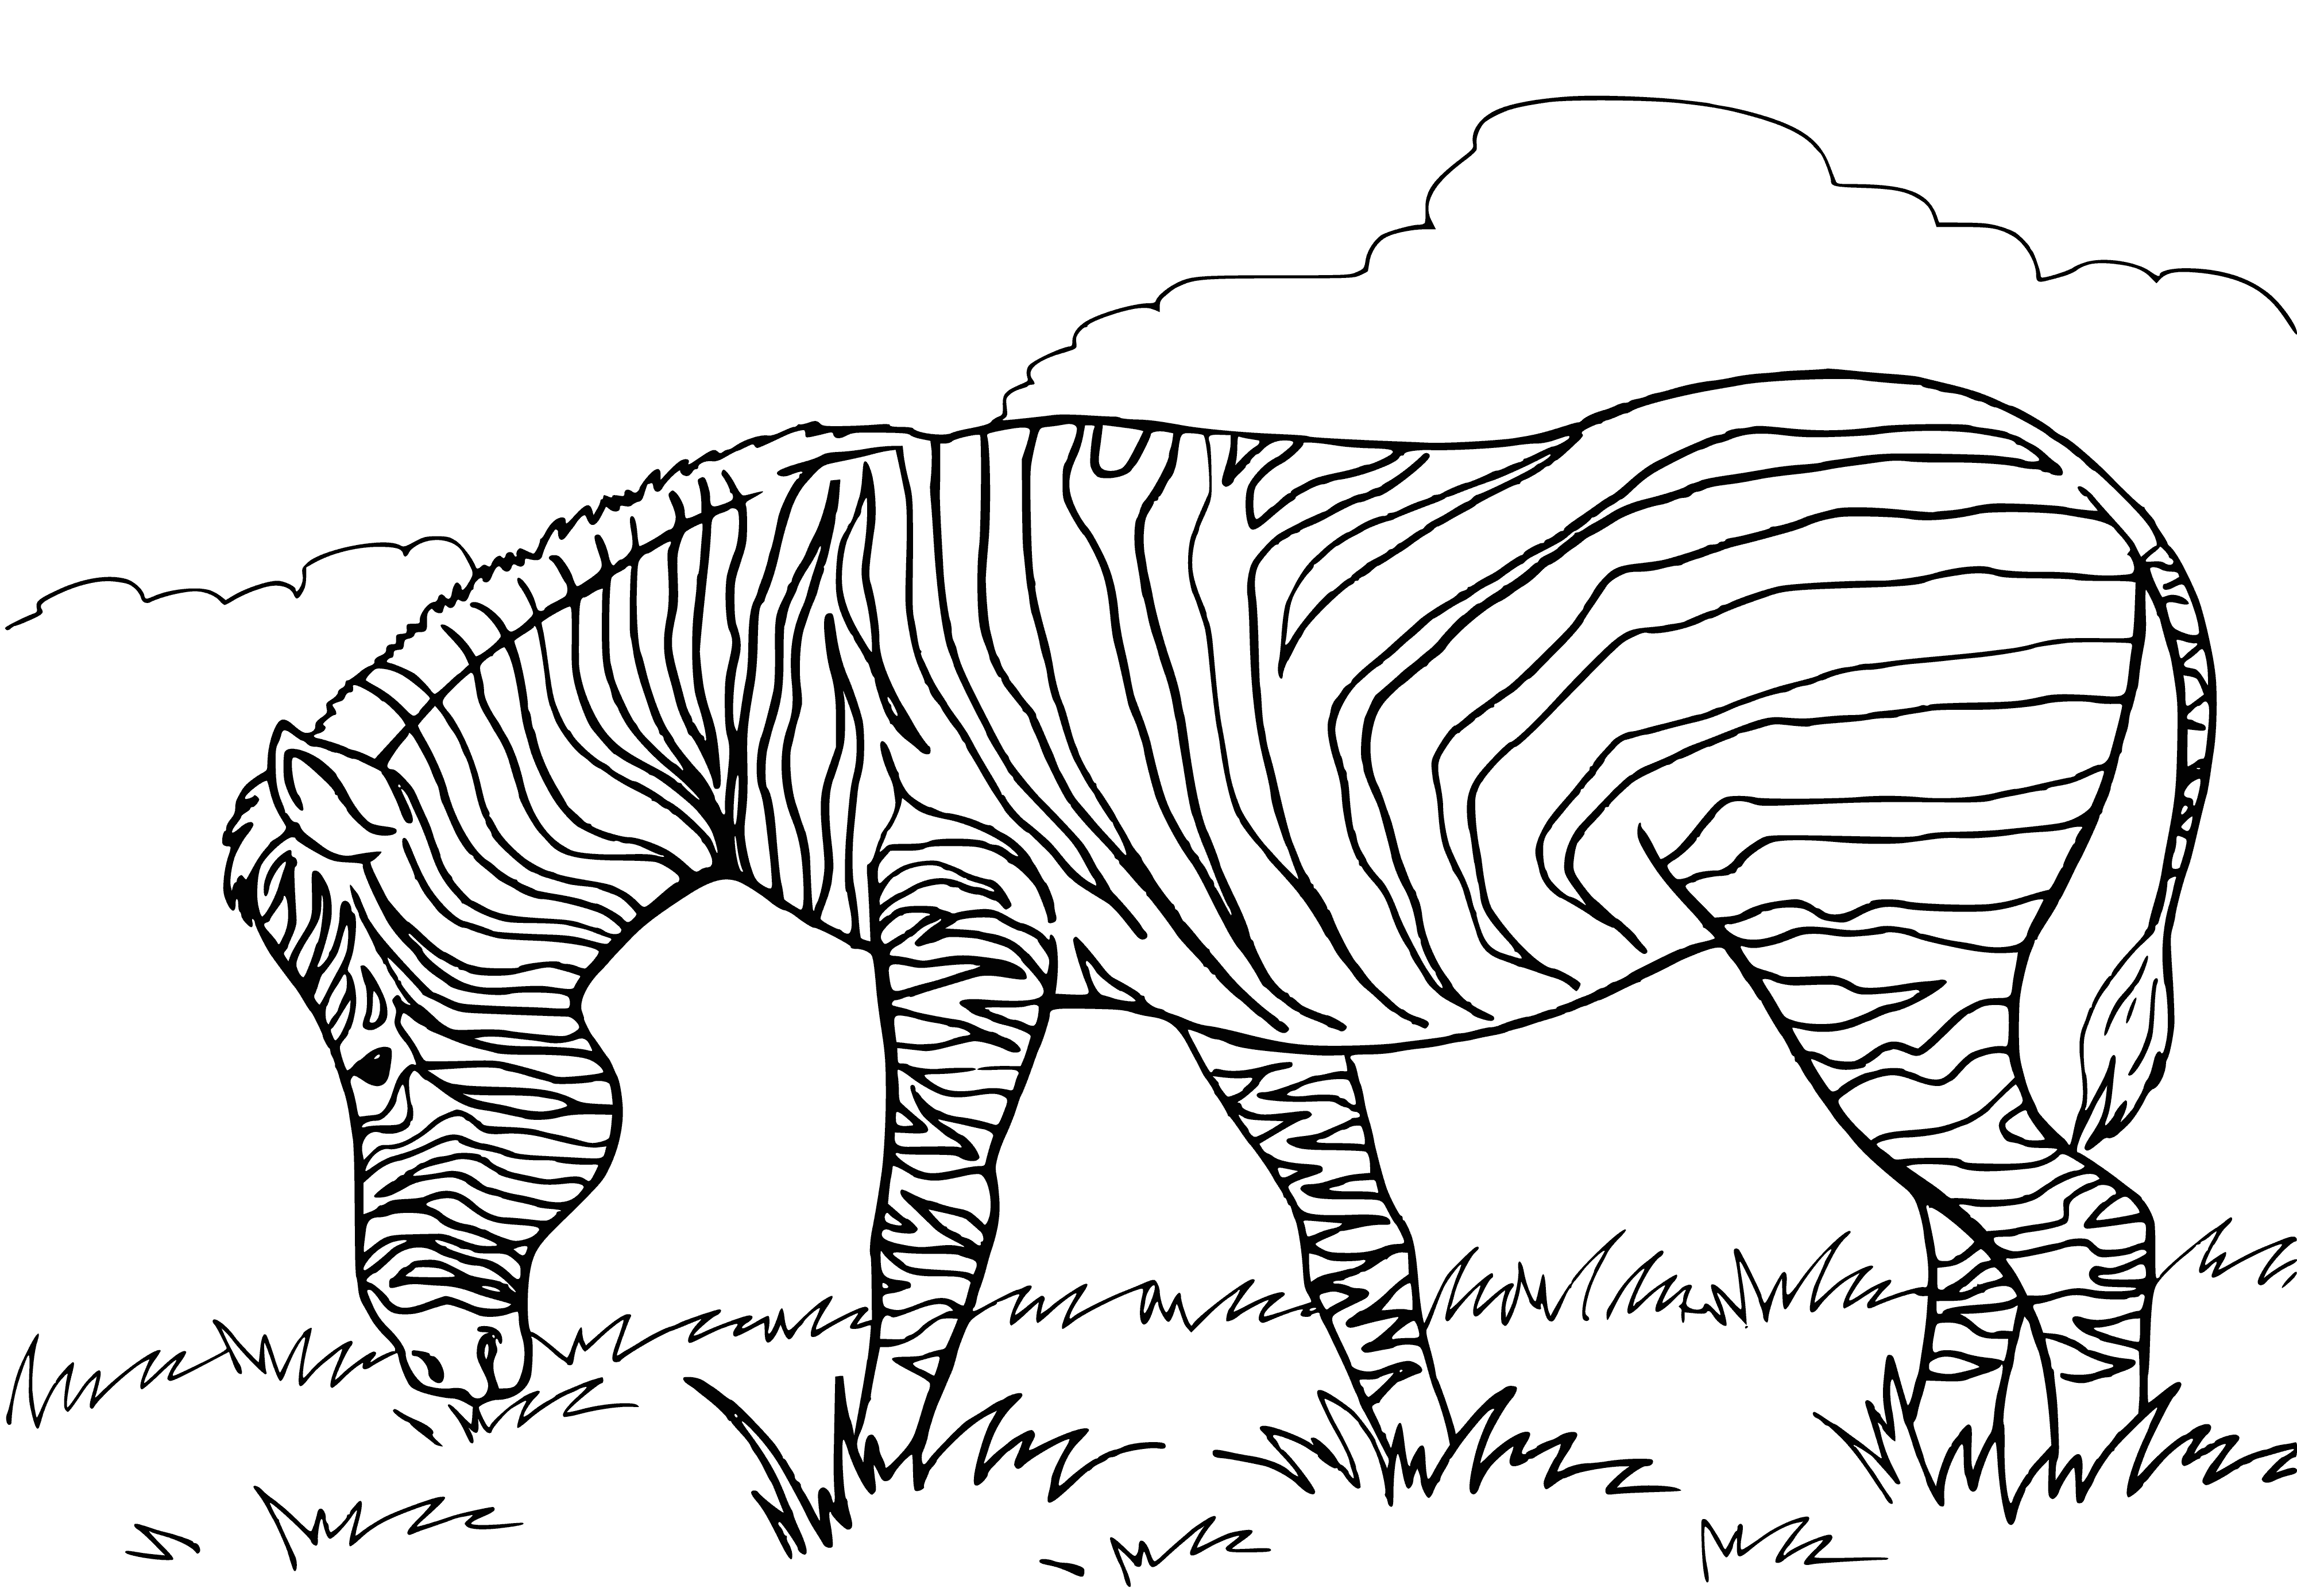 coloring page: Mammal Equidae with coat of black and white stripes; odd-toed ungulate.